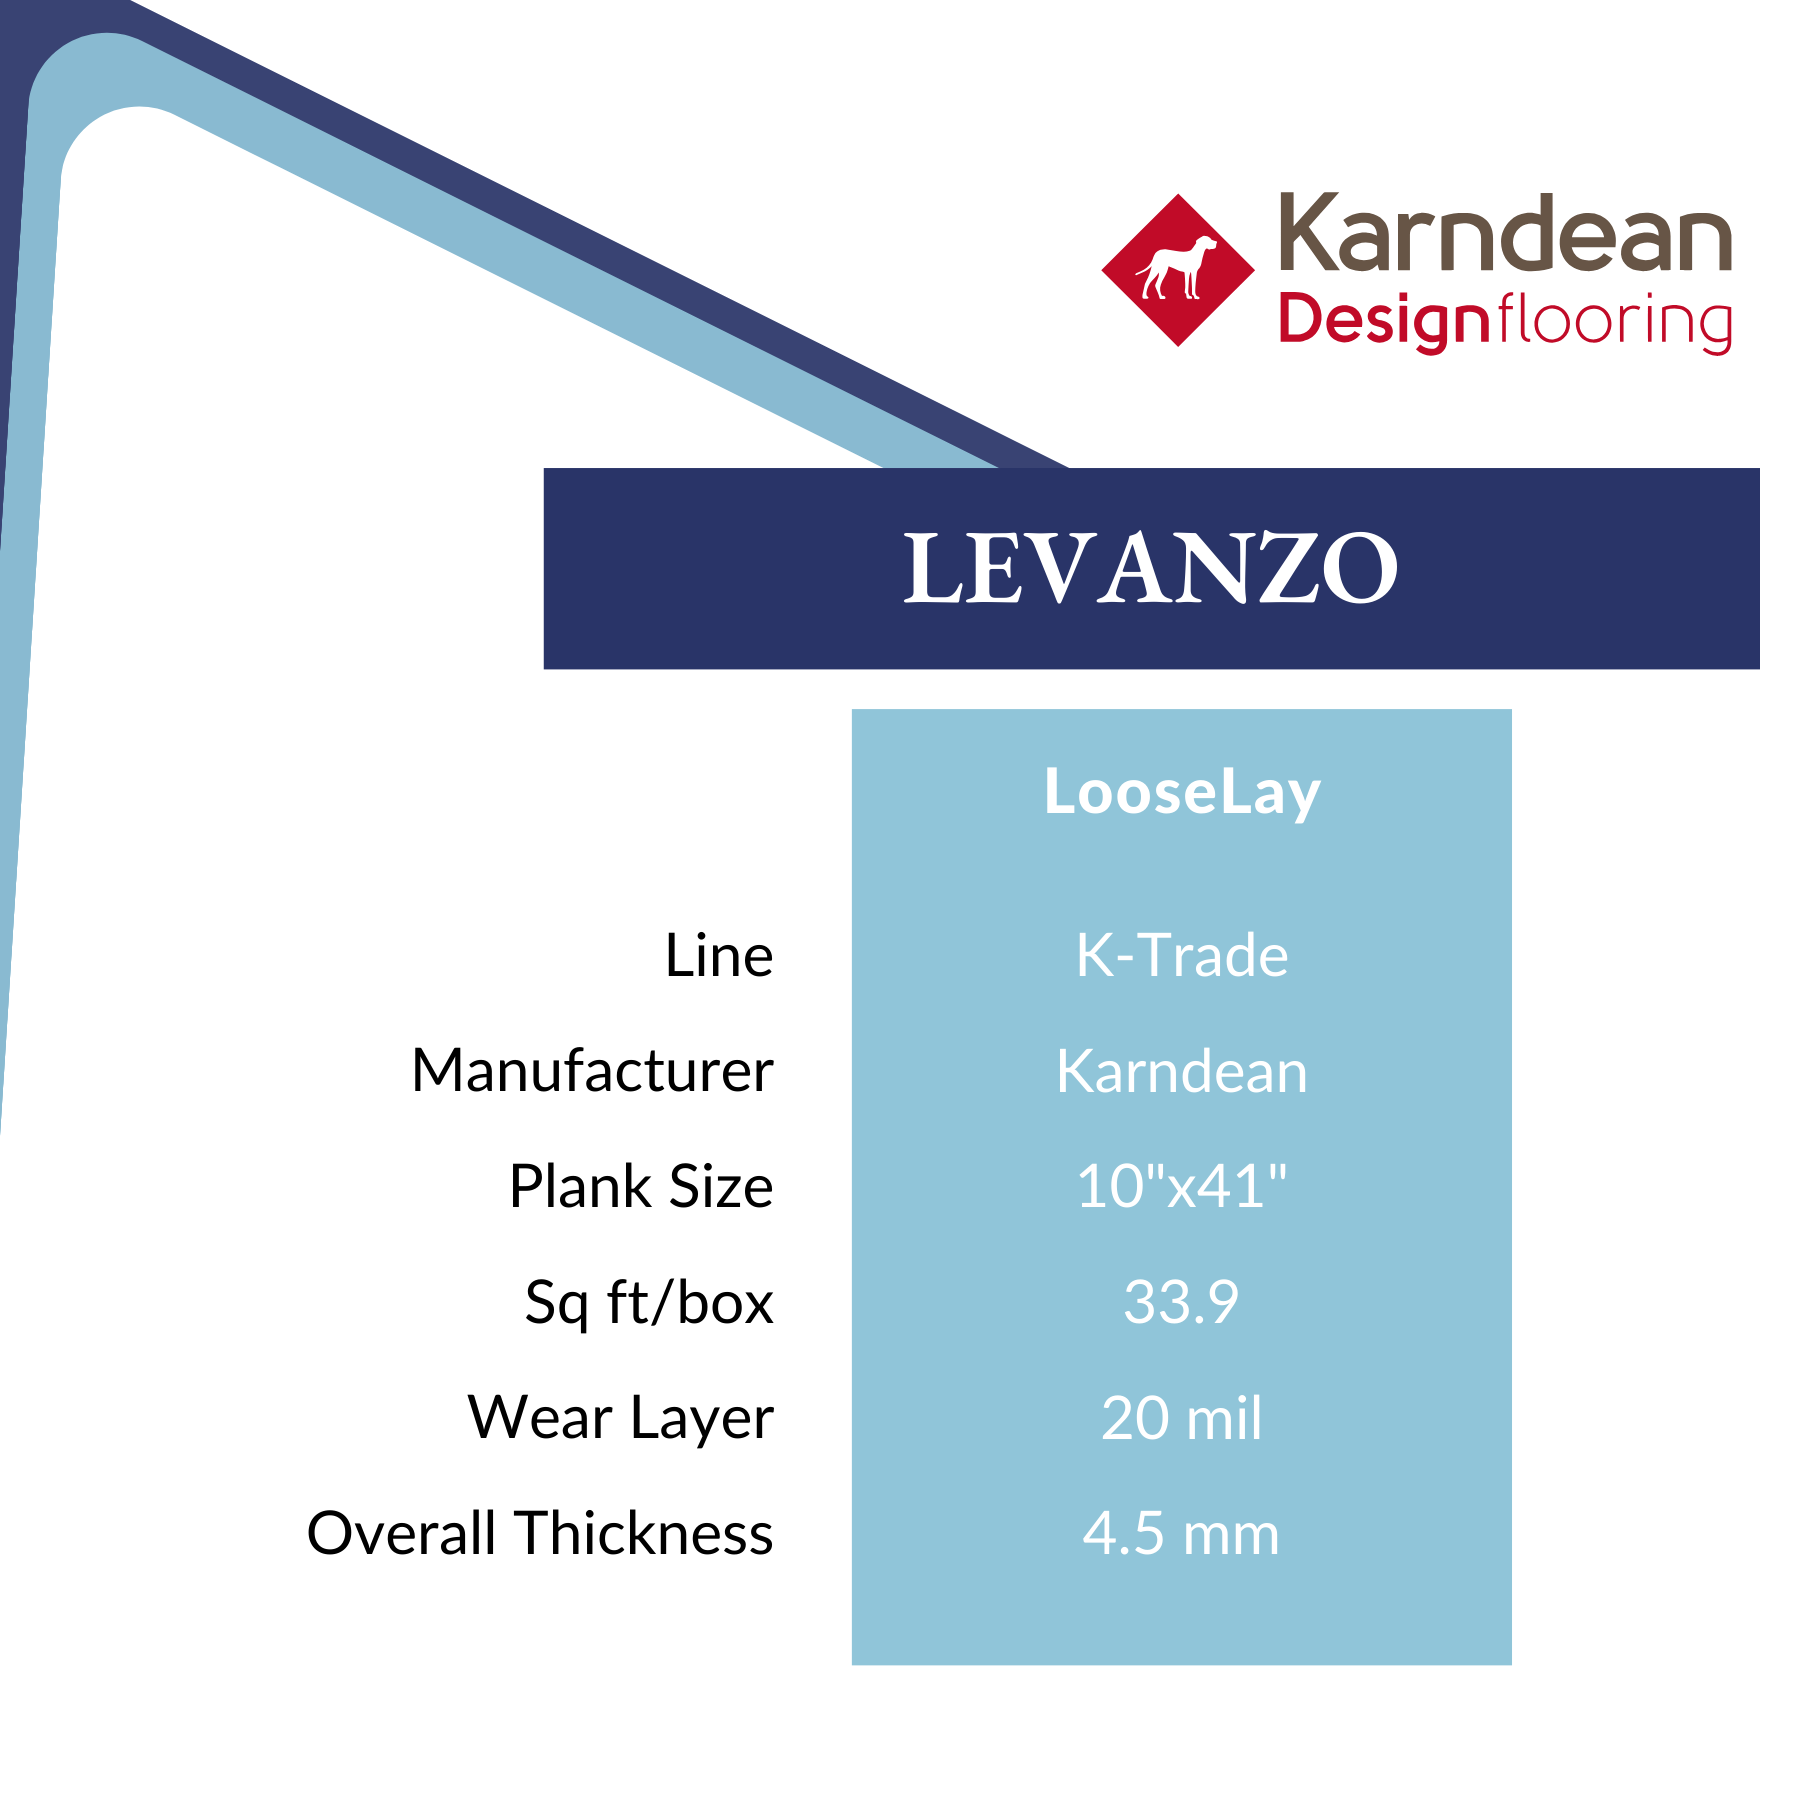 Levanzo by Karndean Clearance flooring from Calhoun's Springfield IL specs